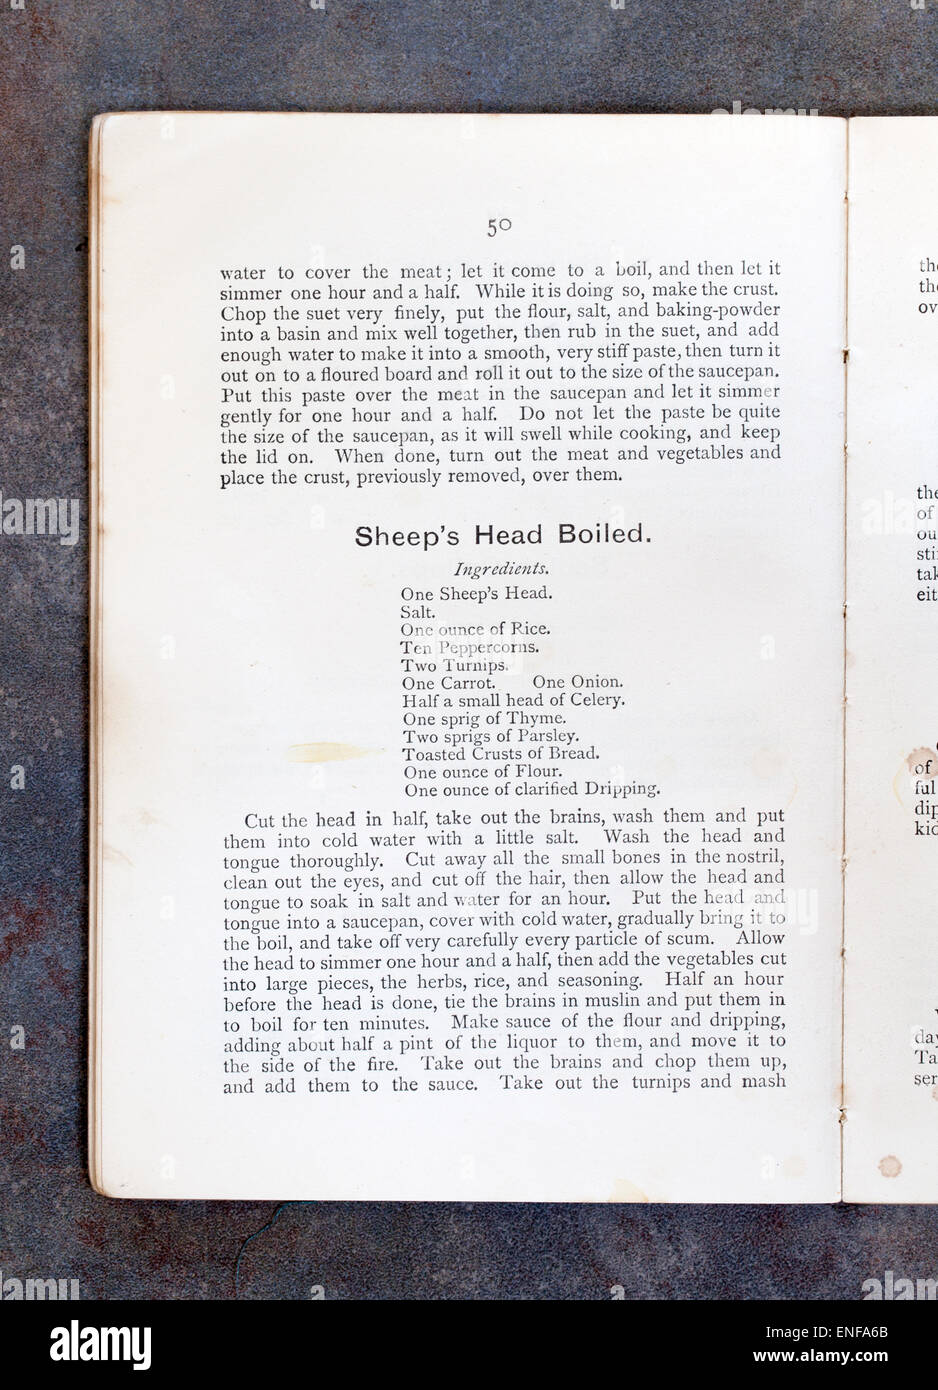 Sheeps Head Boiled Recipe from Plain Cookery Recipes Book by Mrs Charles Clarke for the National Training School for Cookery Stock Photo